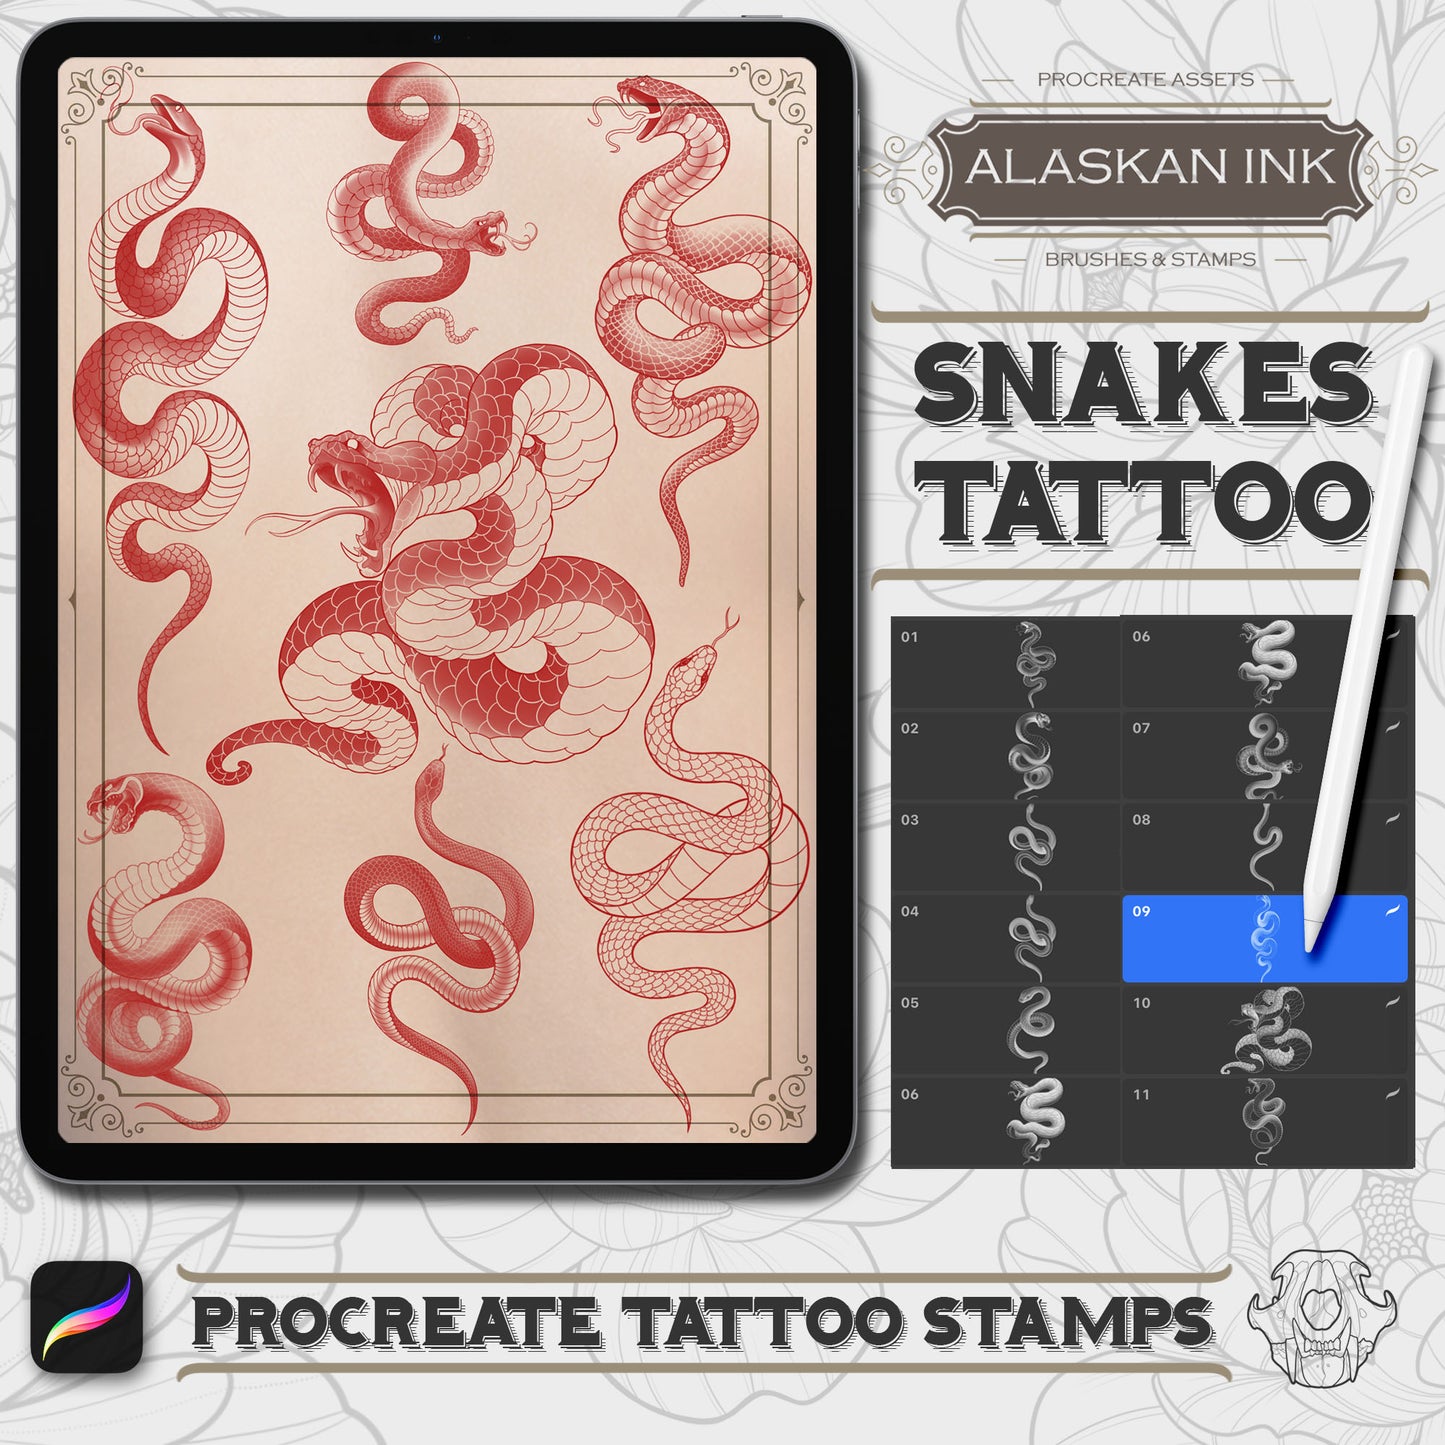 61 Snakes Procreate Tattoo Brushes compatible for iPad and iPad pro by Alaskan ink studio